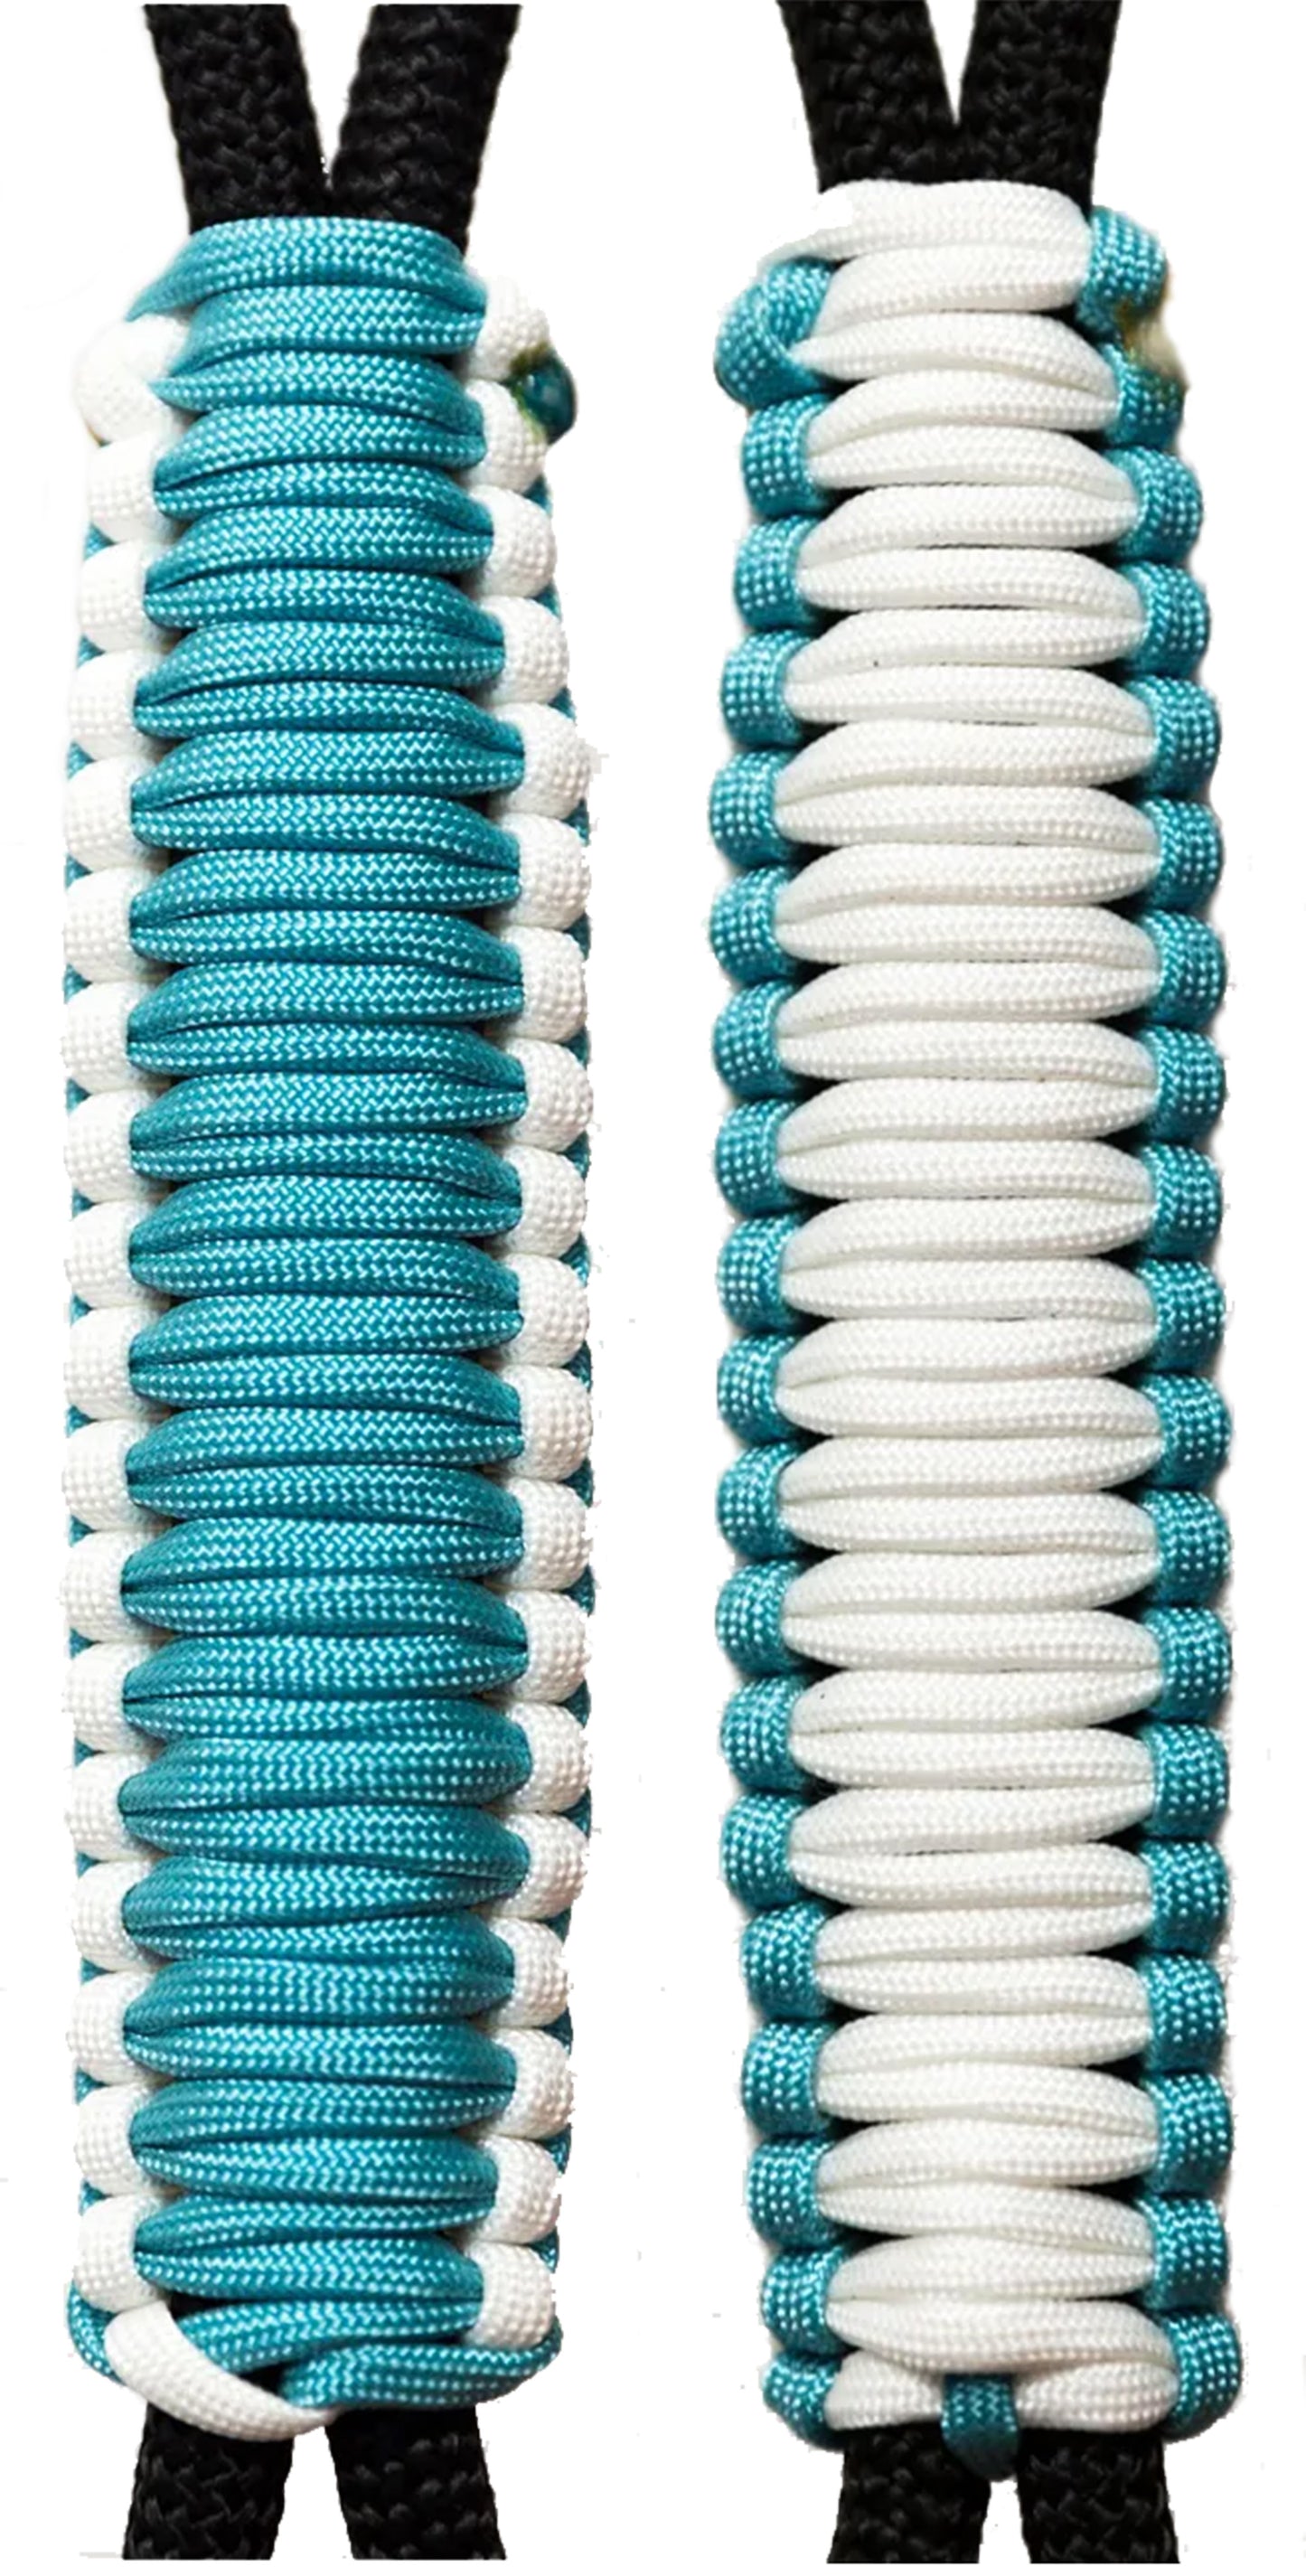 Carolina Blue & White -C035C014 - Paracord Handmade Handles for Stainless Steel Tumblers - Made in USA!